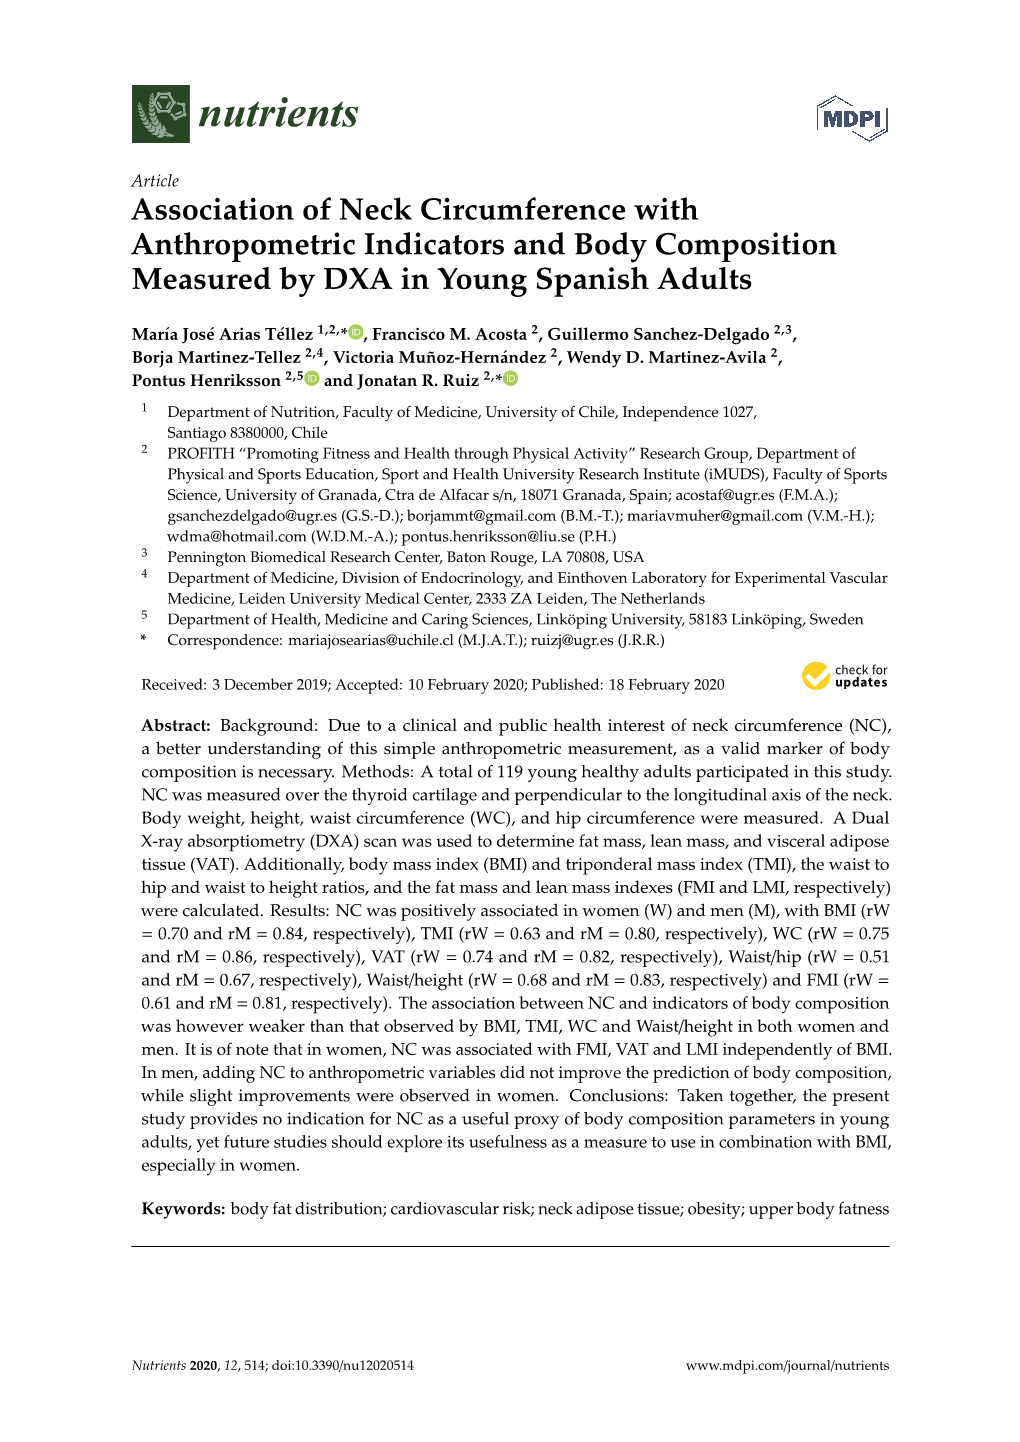 Association of Neck Circumference with Anthropometric Indicators and Body Composition Measured by DXA in Young Spanish Adults